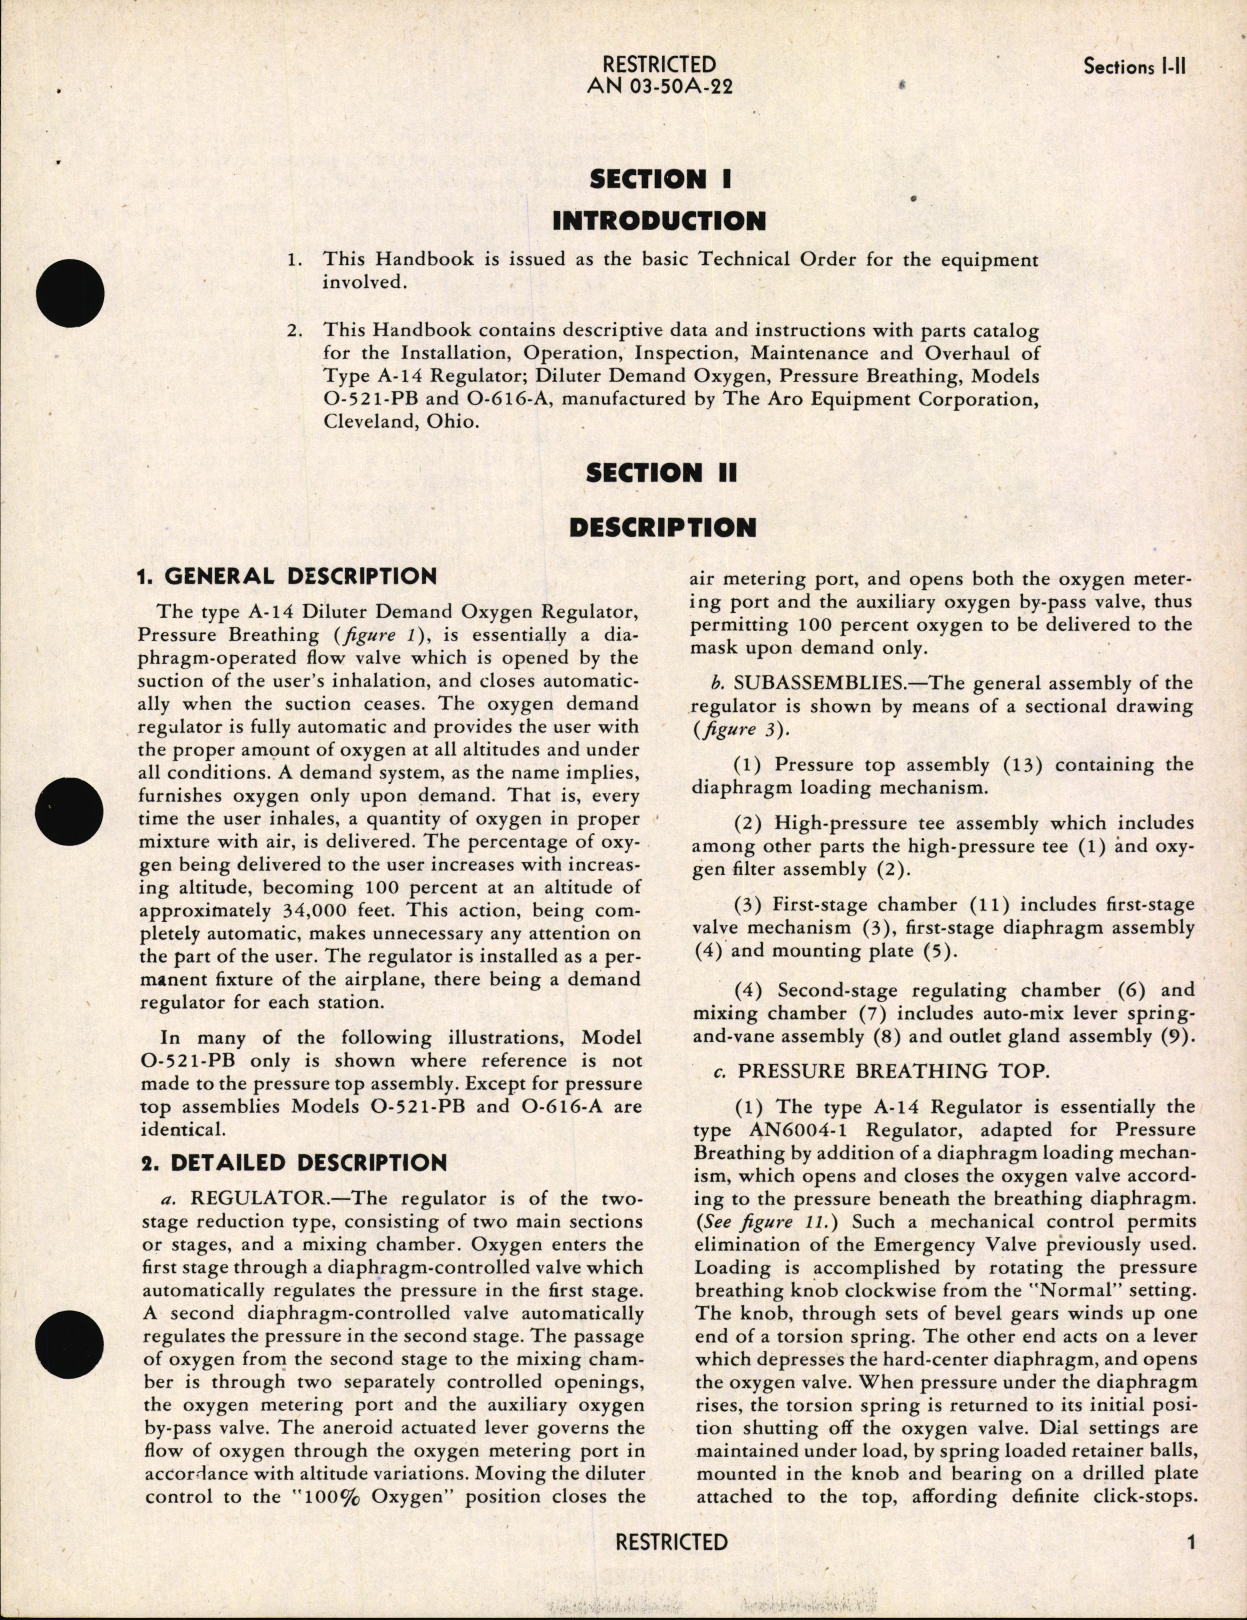 Sample page 5 from AirCorps Library document: Operation, Service and Overhaul Instructions for Pressure Breathing Diluter Demand Oxygen Regulator Type A-14